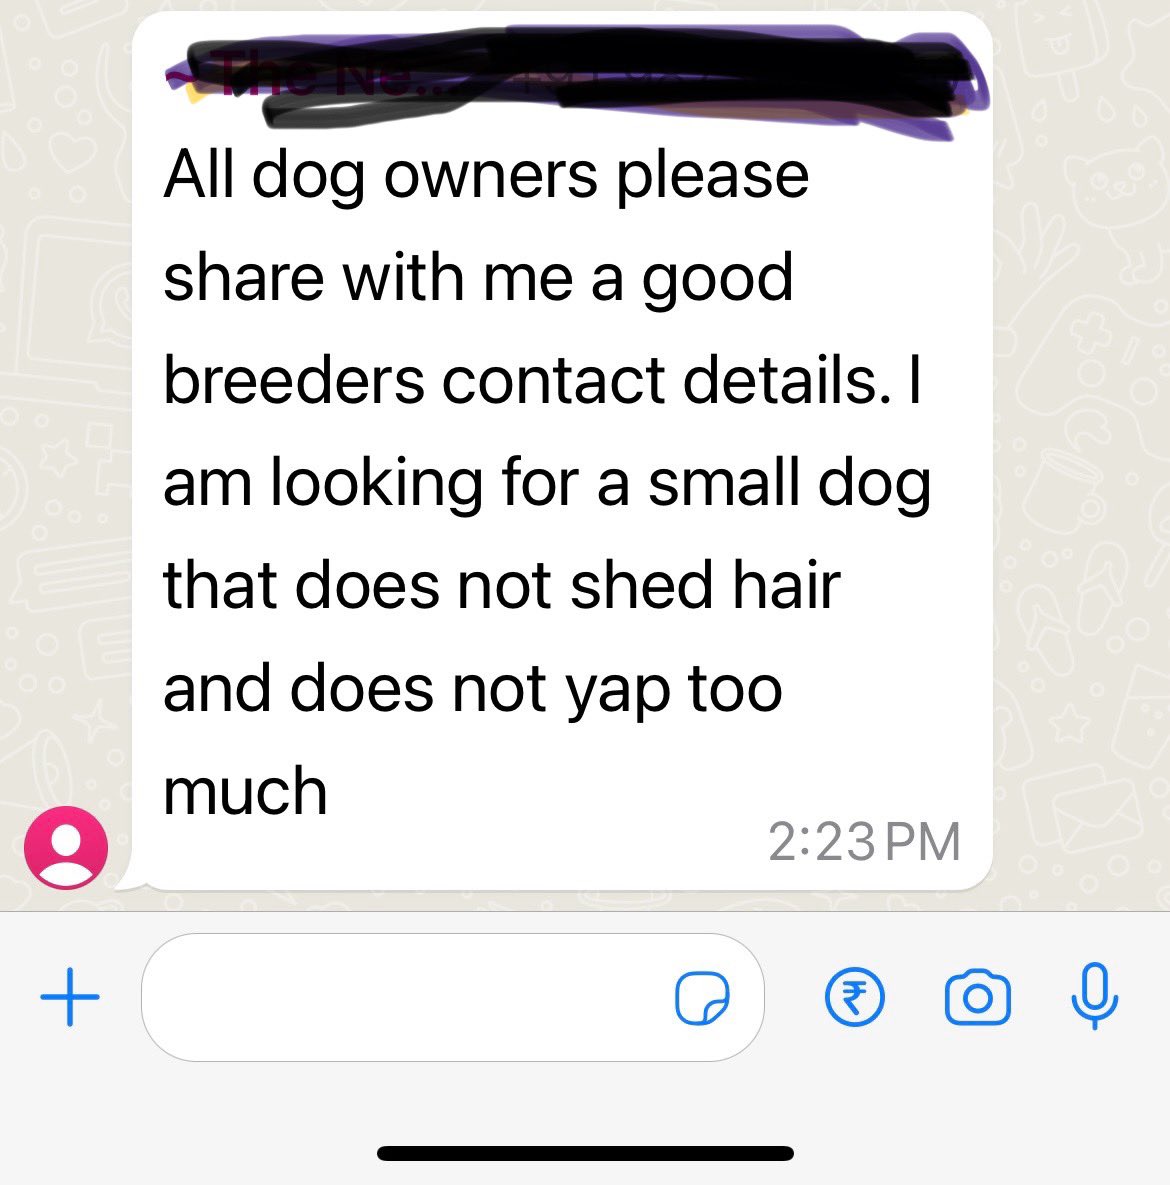 This popped up on my condo group today. What should be the response? #petparents @PetaIndia